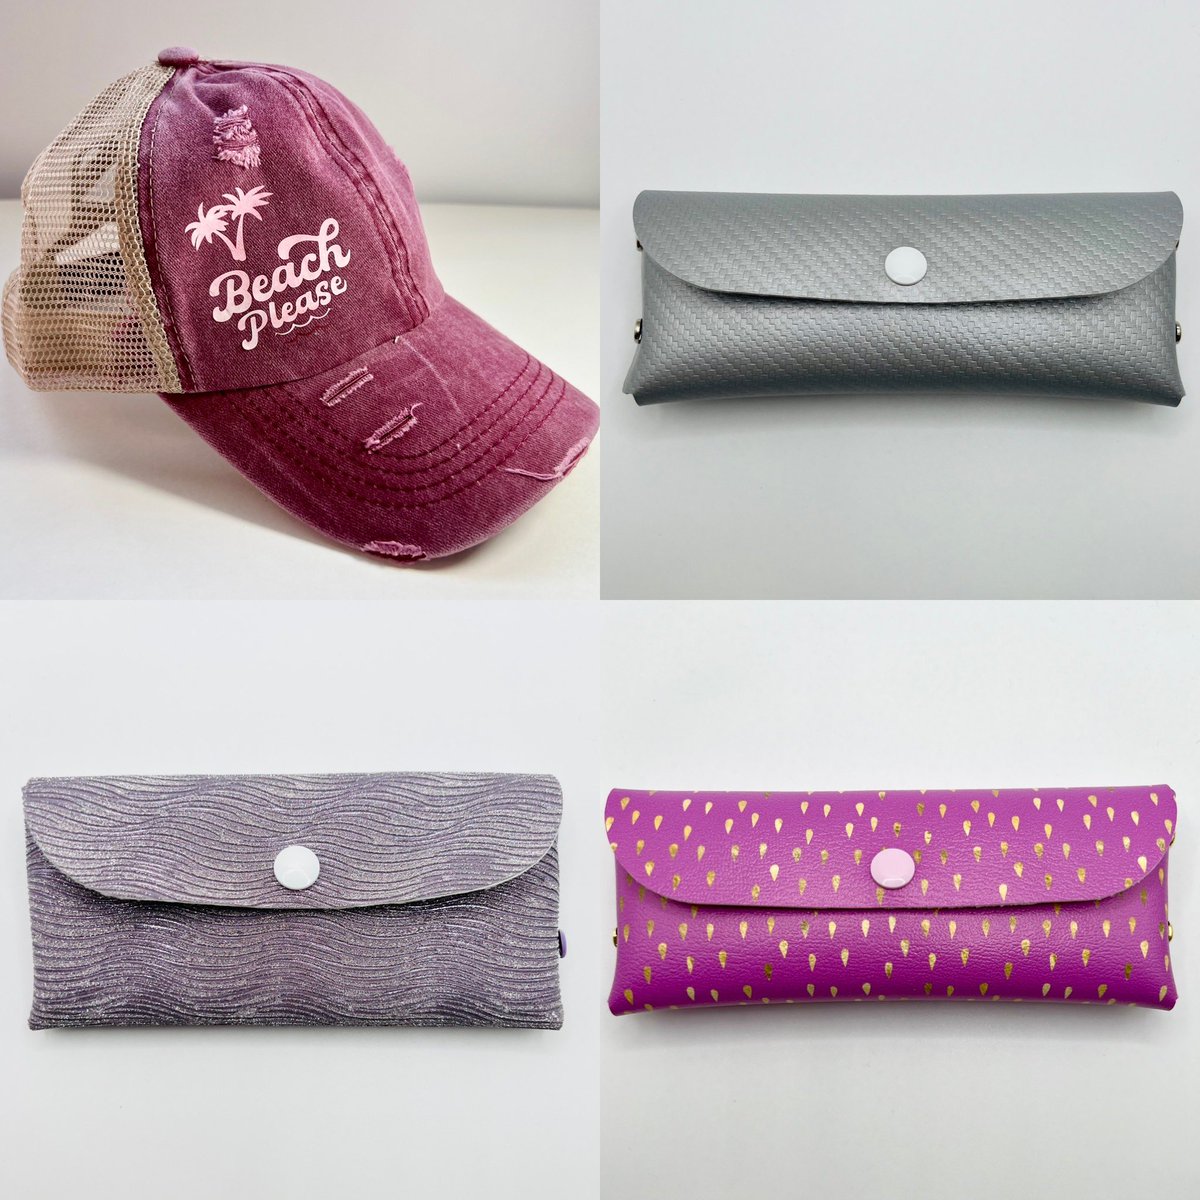 New items listed! Lots of other styles to come. 

etsy.com/shop/RadCrafty 

#shoplocal #handmade #veganleather #etsy #glasses #glassescase #eyeglasses #softcase #sunglasses #sunglassescase #custom #unique #gift #eyes #accessories #hat #beachplease #distressedhats #lightweight